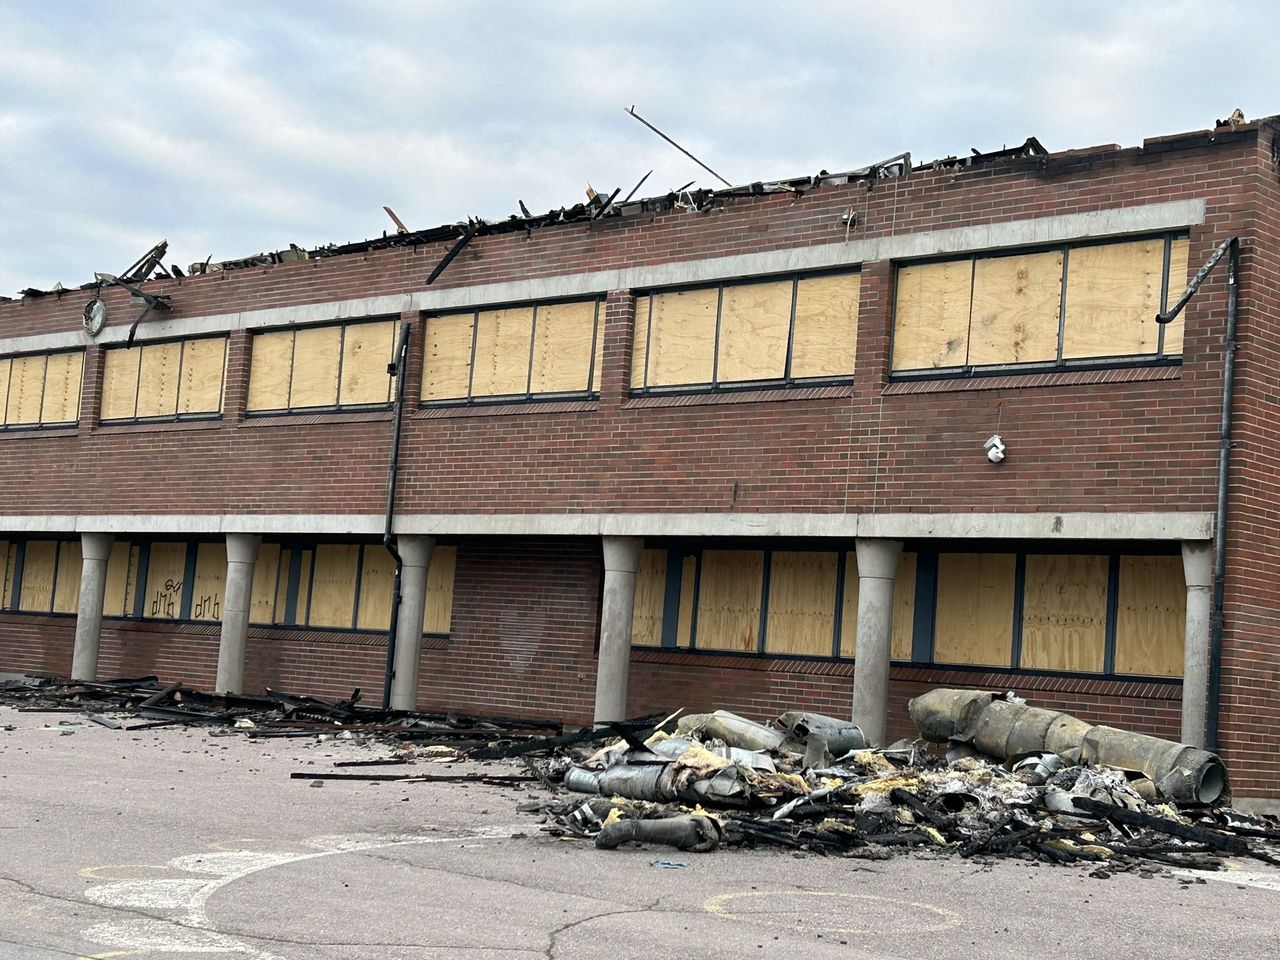 Among other things, an elementary school building was set on fire. Two 15-year-olds have been detained in connection with the case.